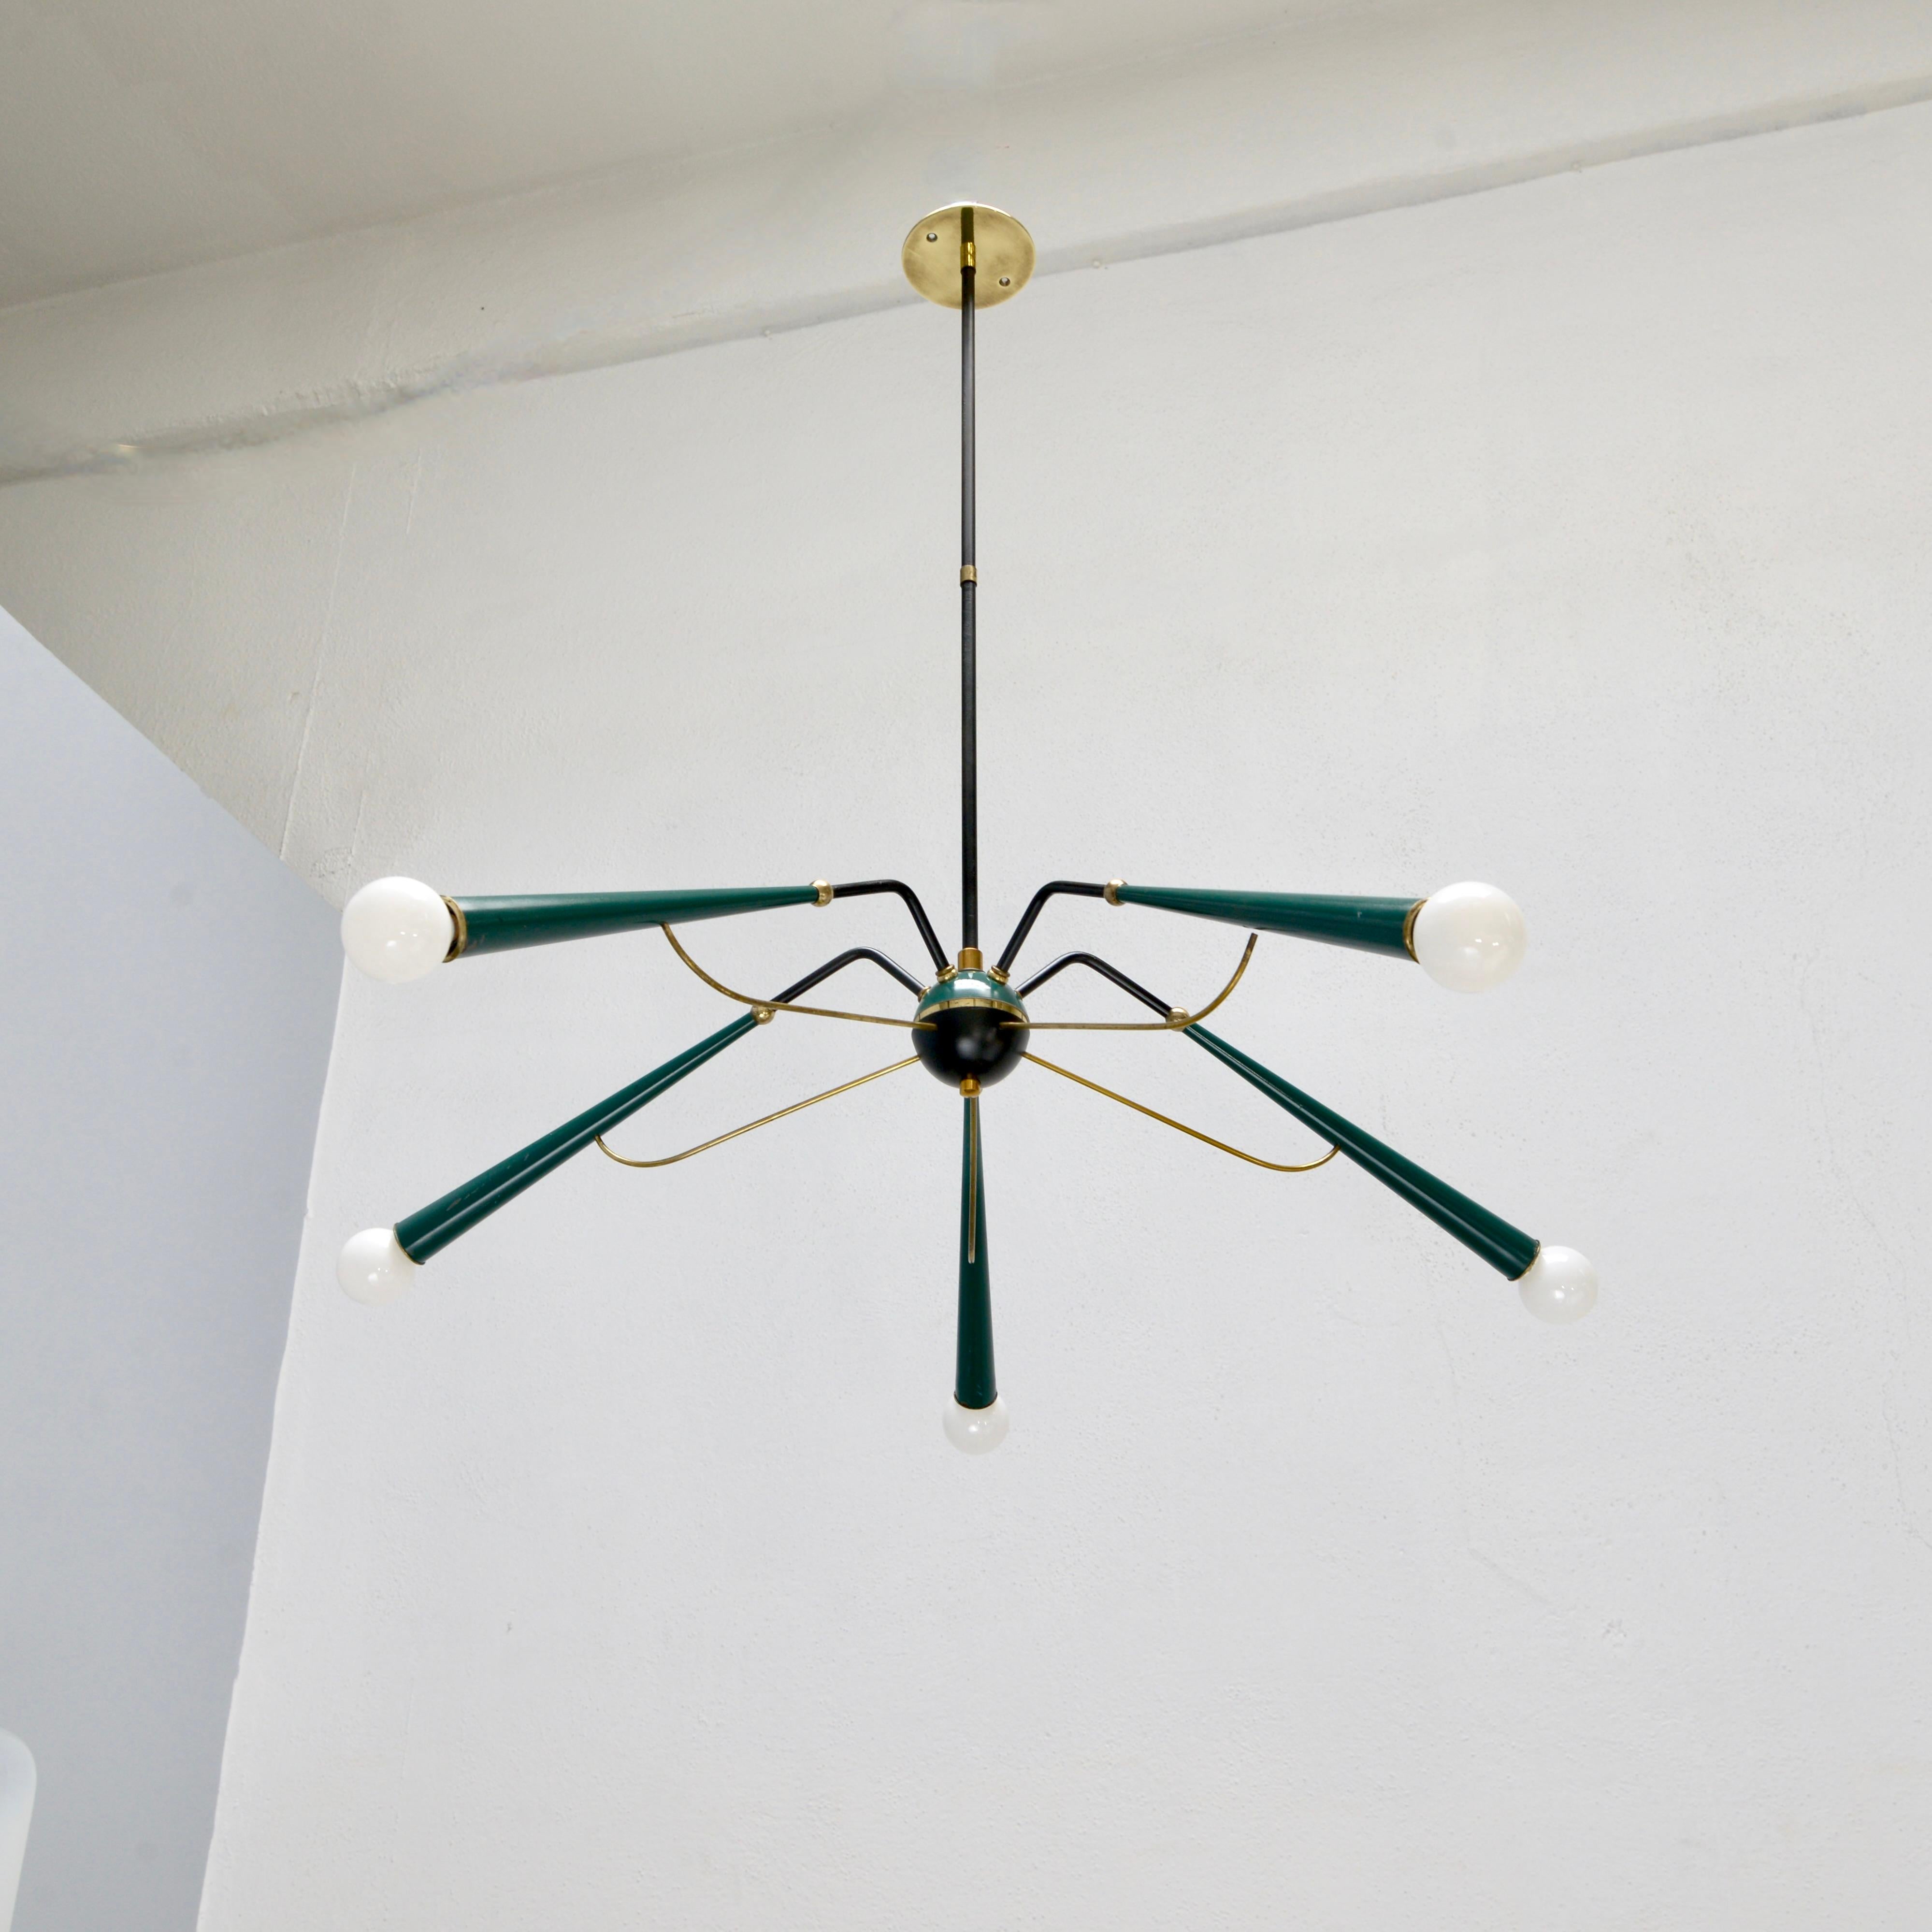 A wonderful 1950s Oscar Torlasco Sputnik chandelier from Italy, with original green paint. Partially restored and rewired with 5 E12 candelabra based sockets. For use in the US. Light bulbs included with order. 
Measurements:
OAD: 32” can be